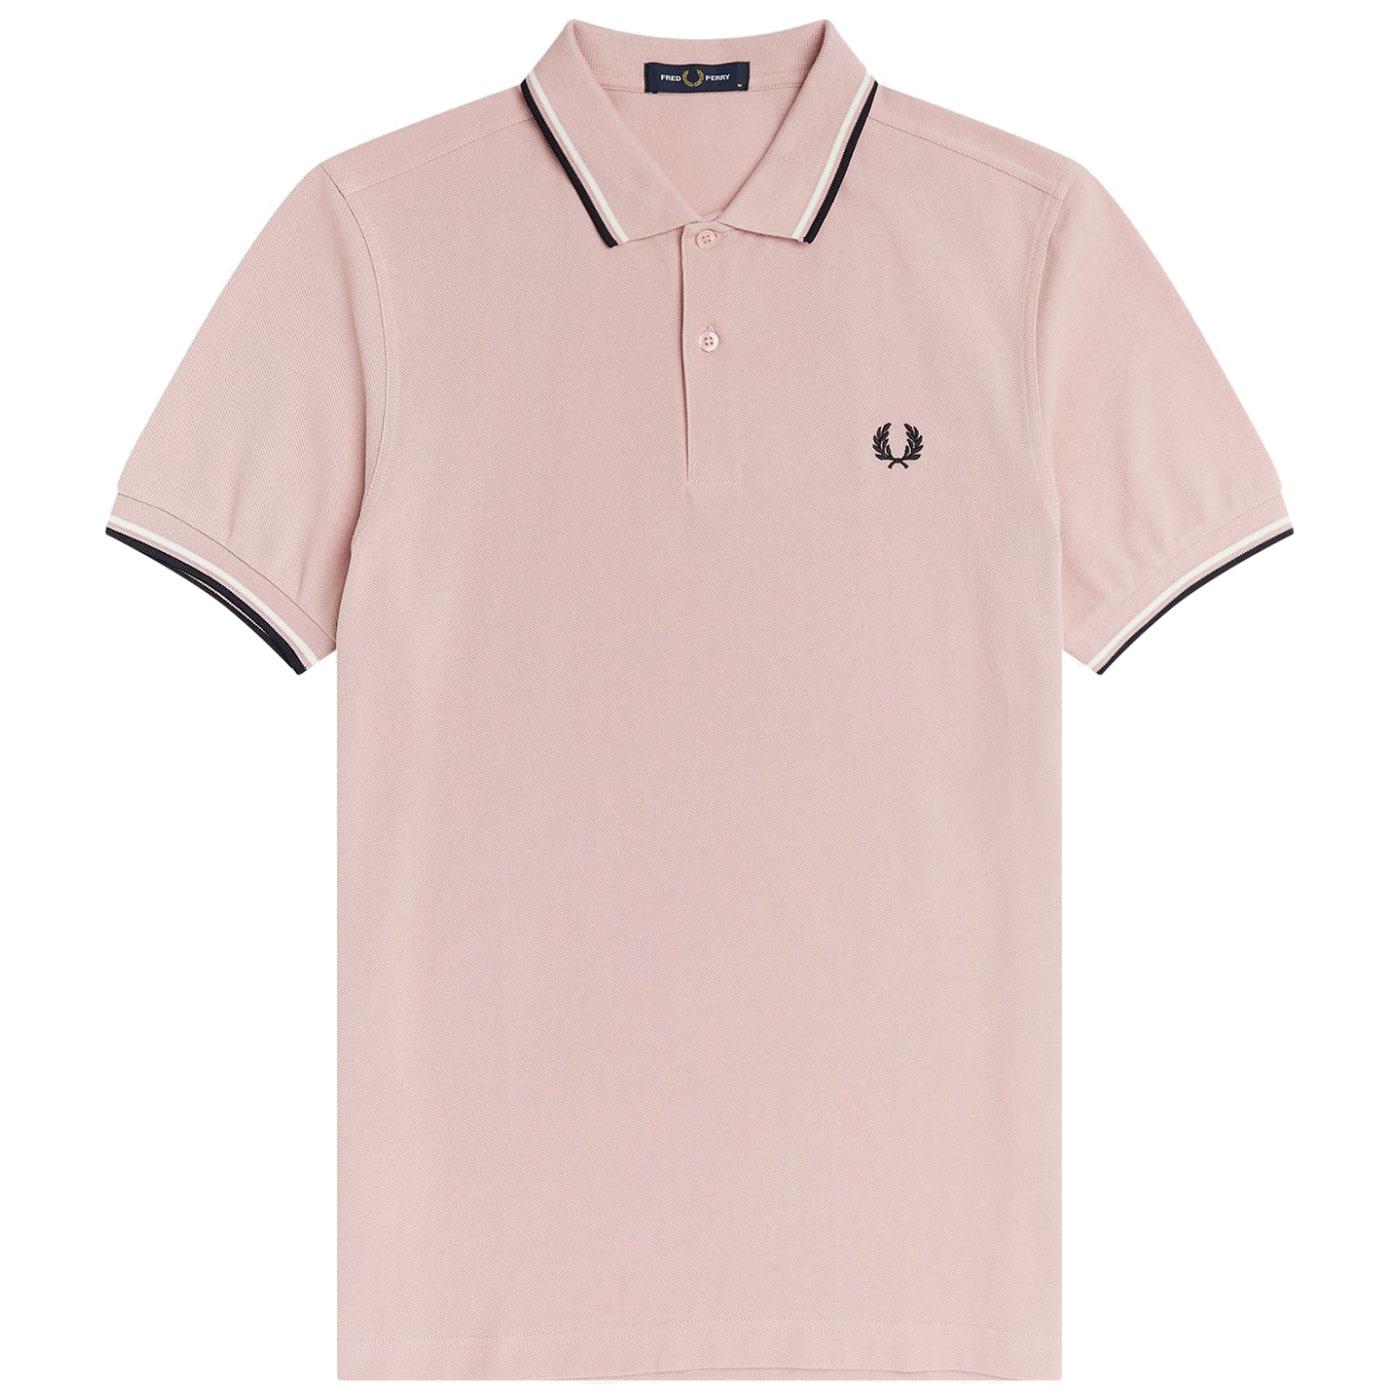 FRED PERRY M3600 Mod Twin Tipped Pique Polo in Chalk Pink